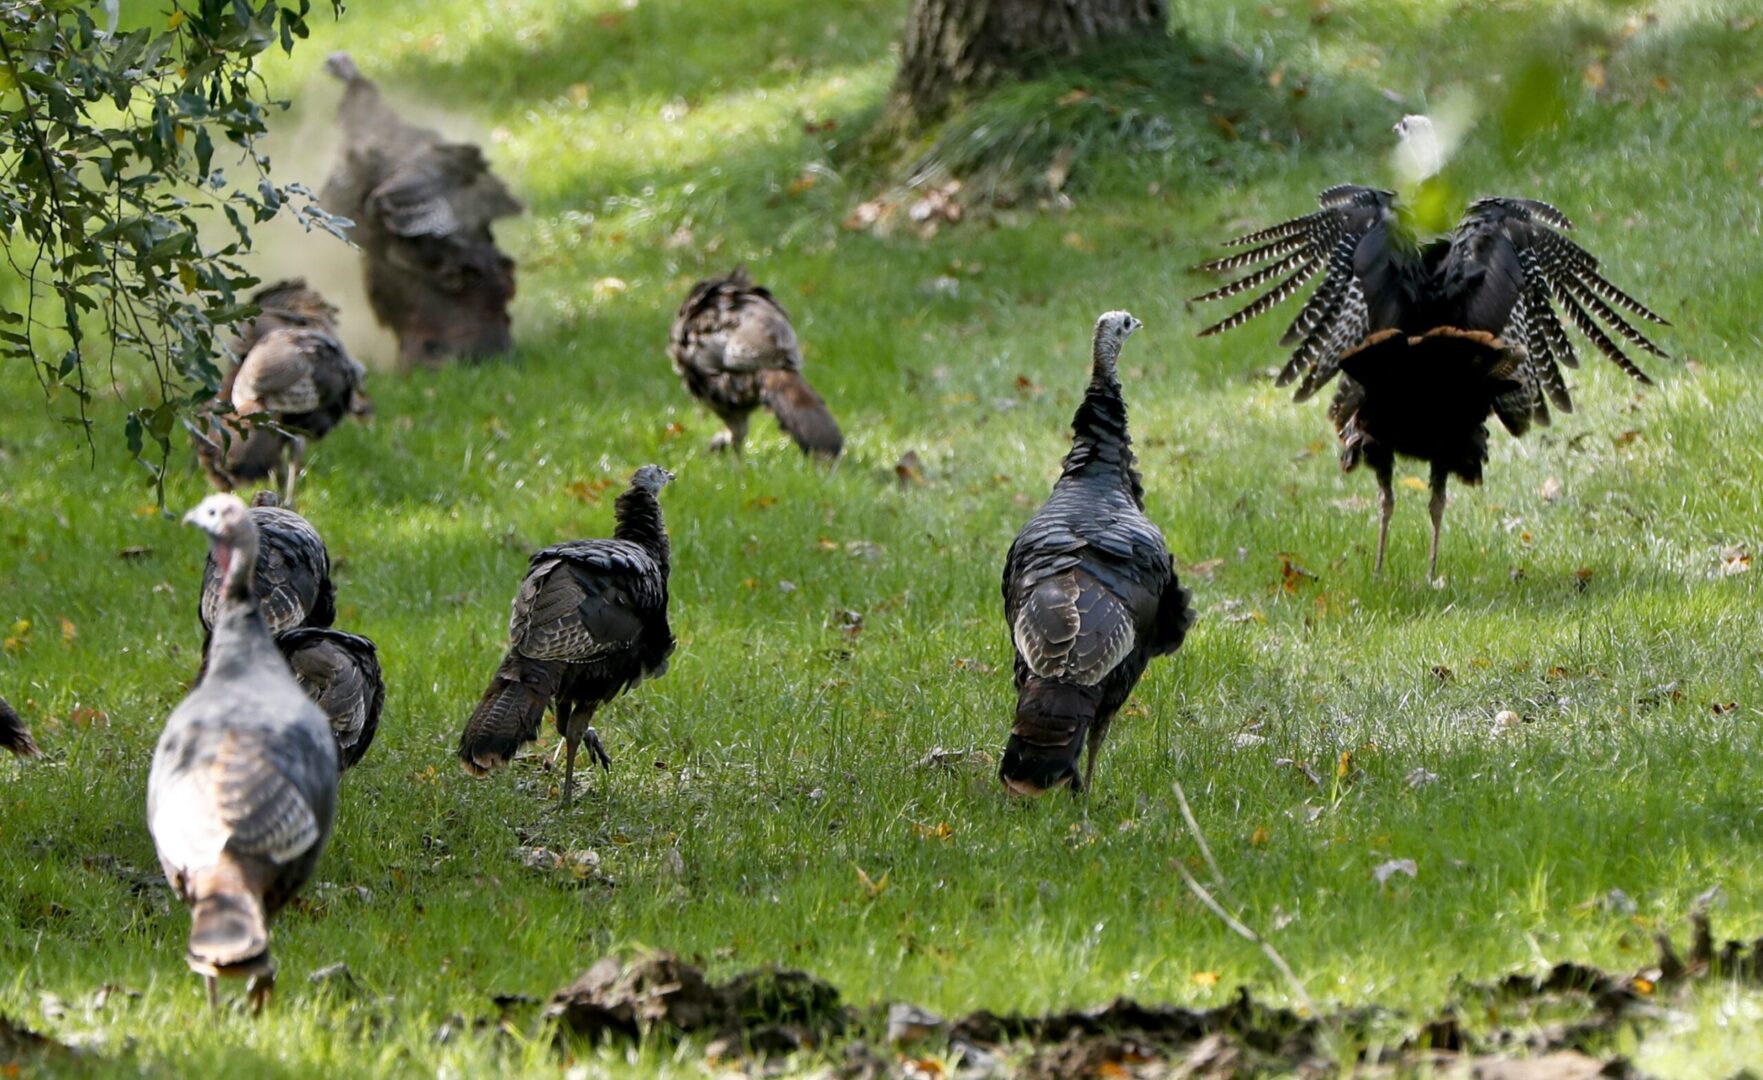 Some of the wild turkeys in a flock flap their wings as they move through a yard after preening on Friday, Oct. 5, 2018 in Zelienople, Pa.